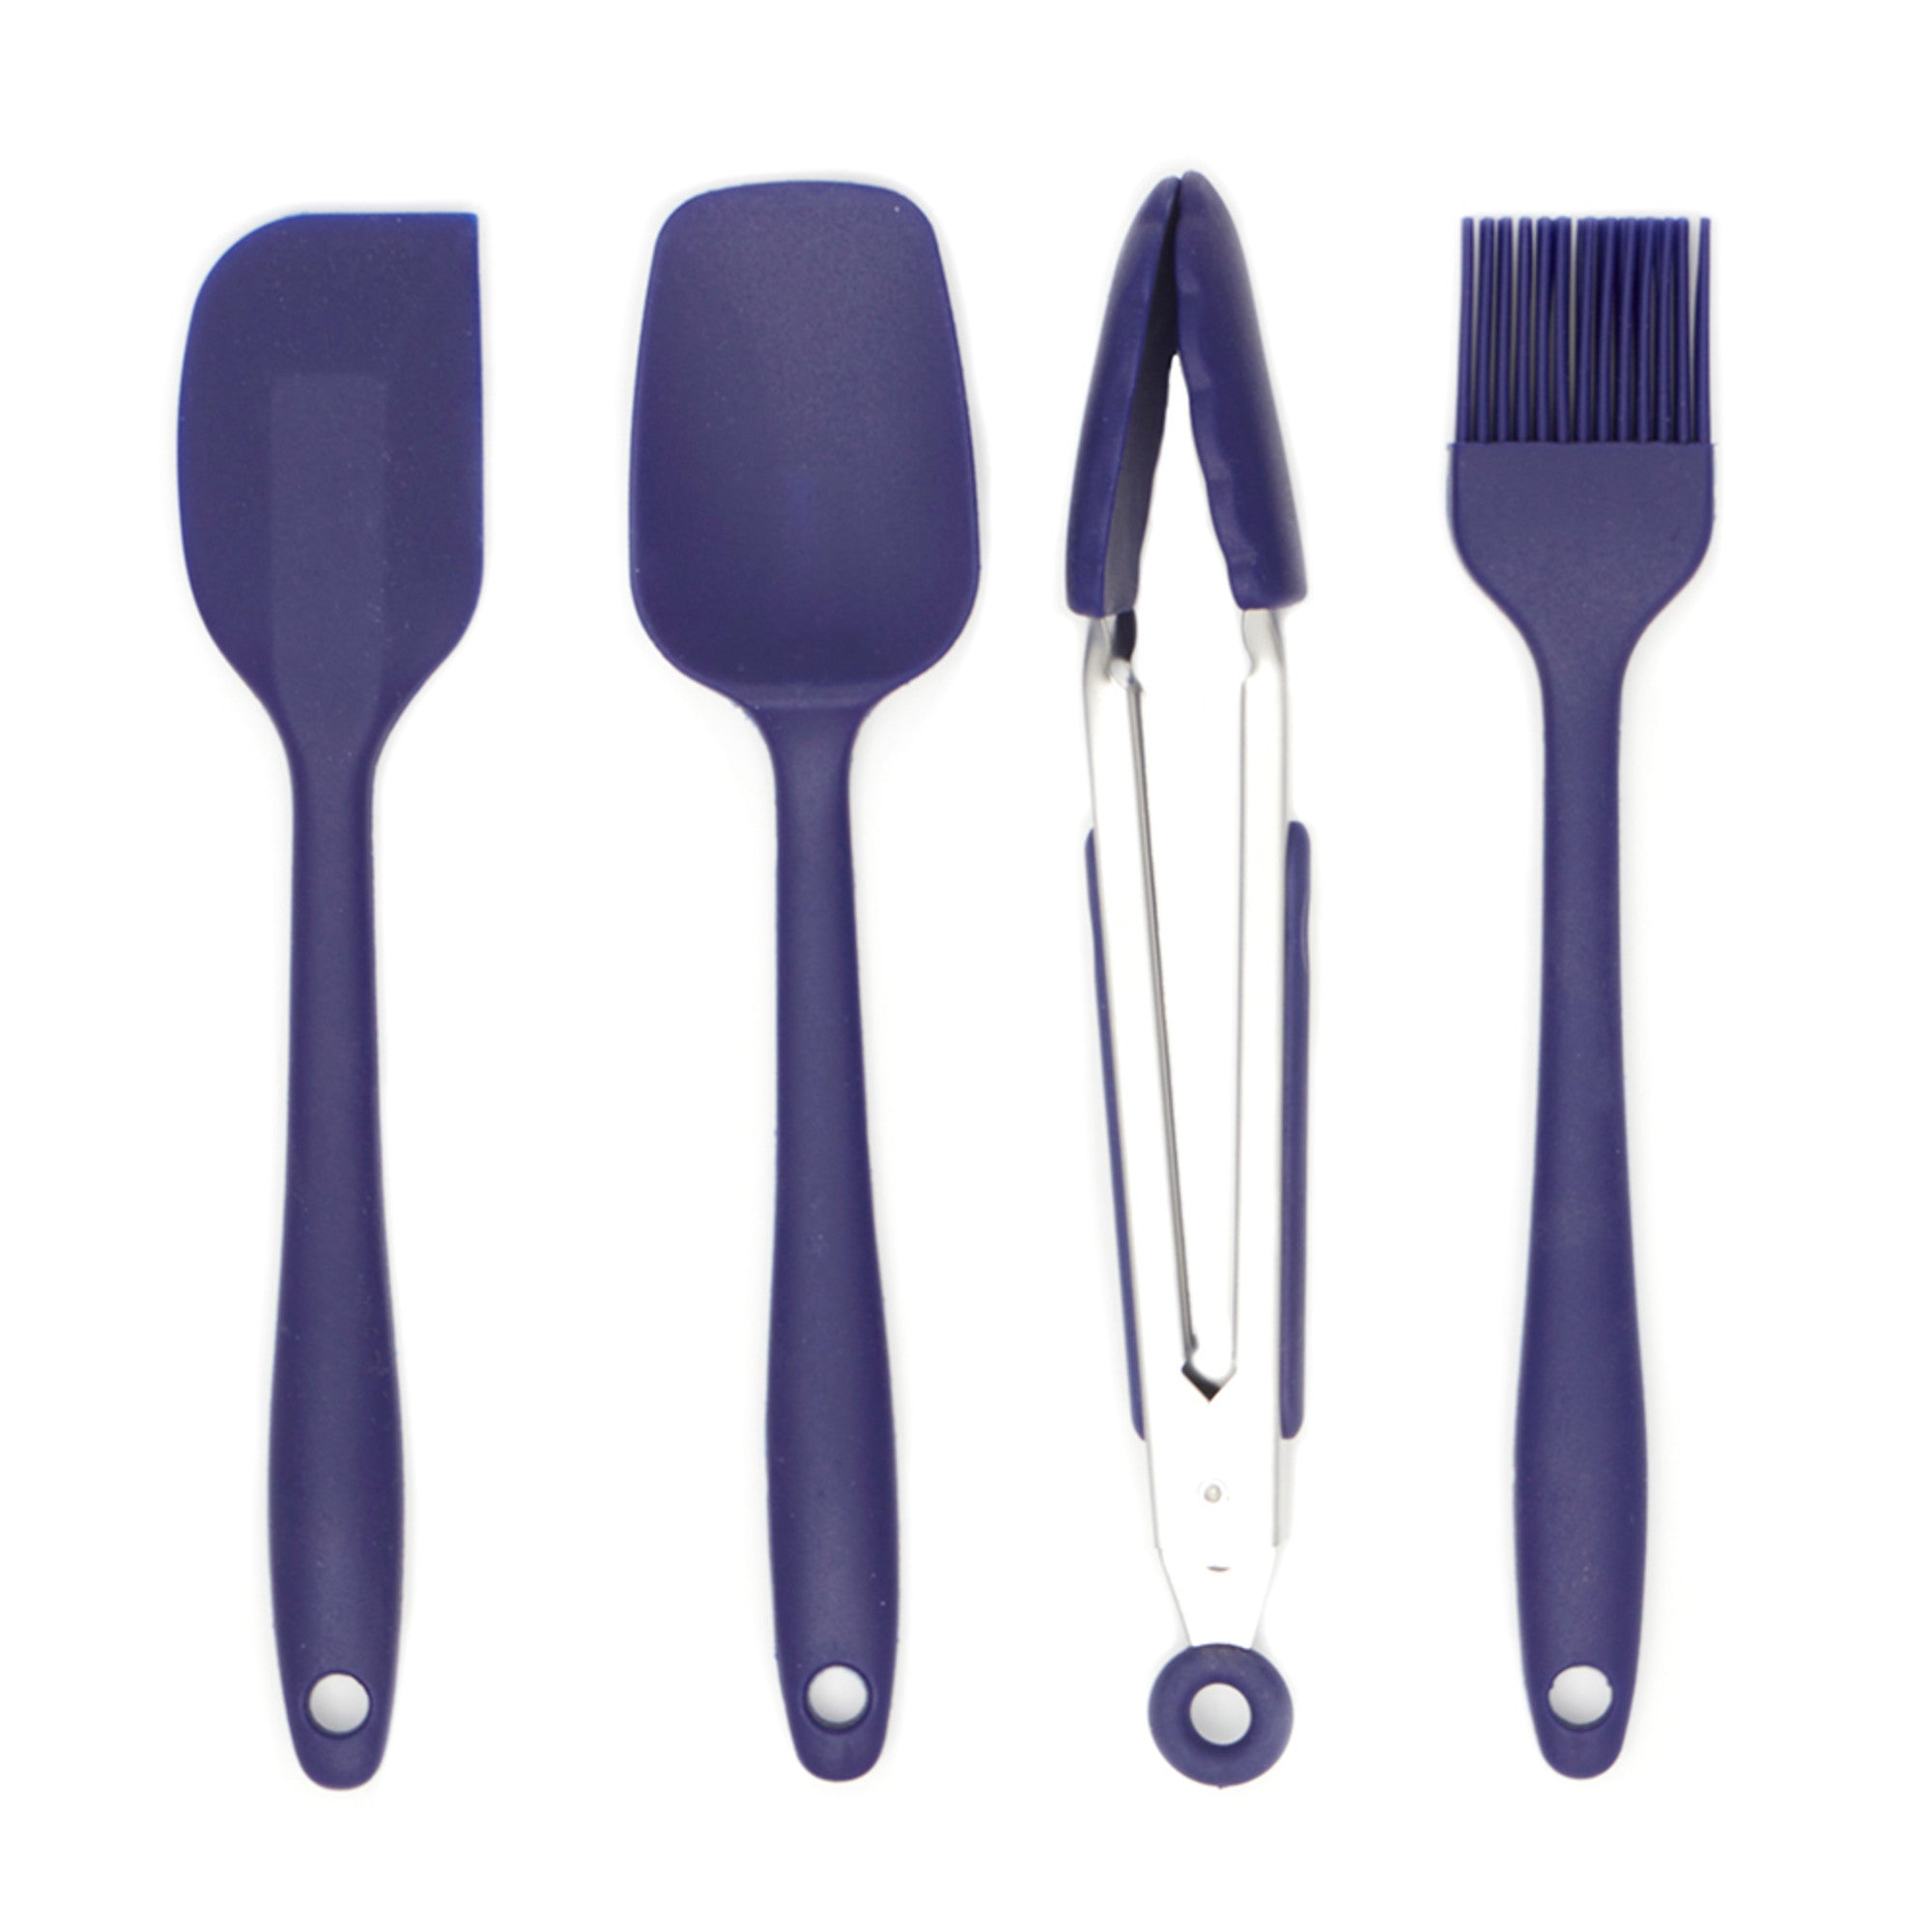 Home Basics 4 Piece Silicone Kitchen Tool Set - Assorted Colors